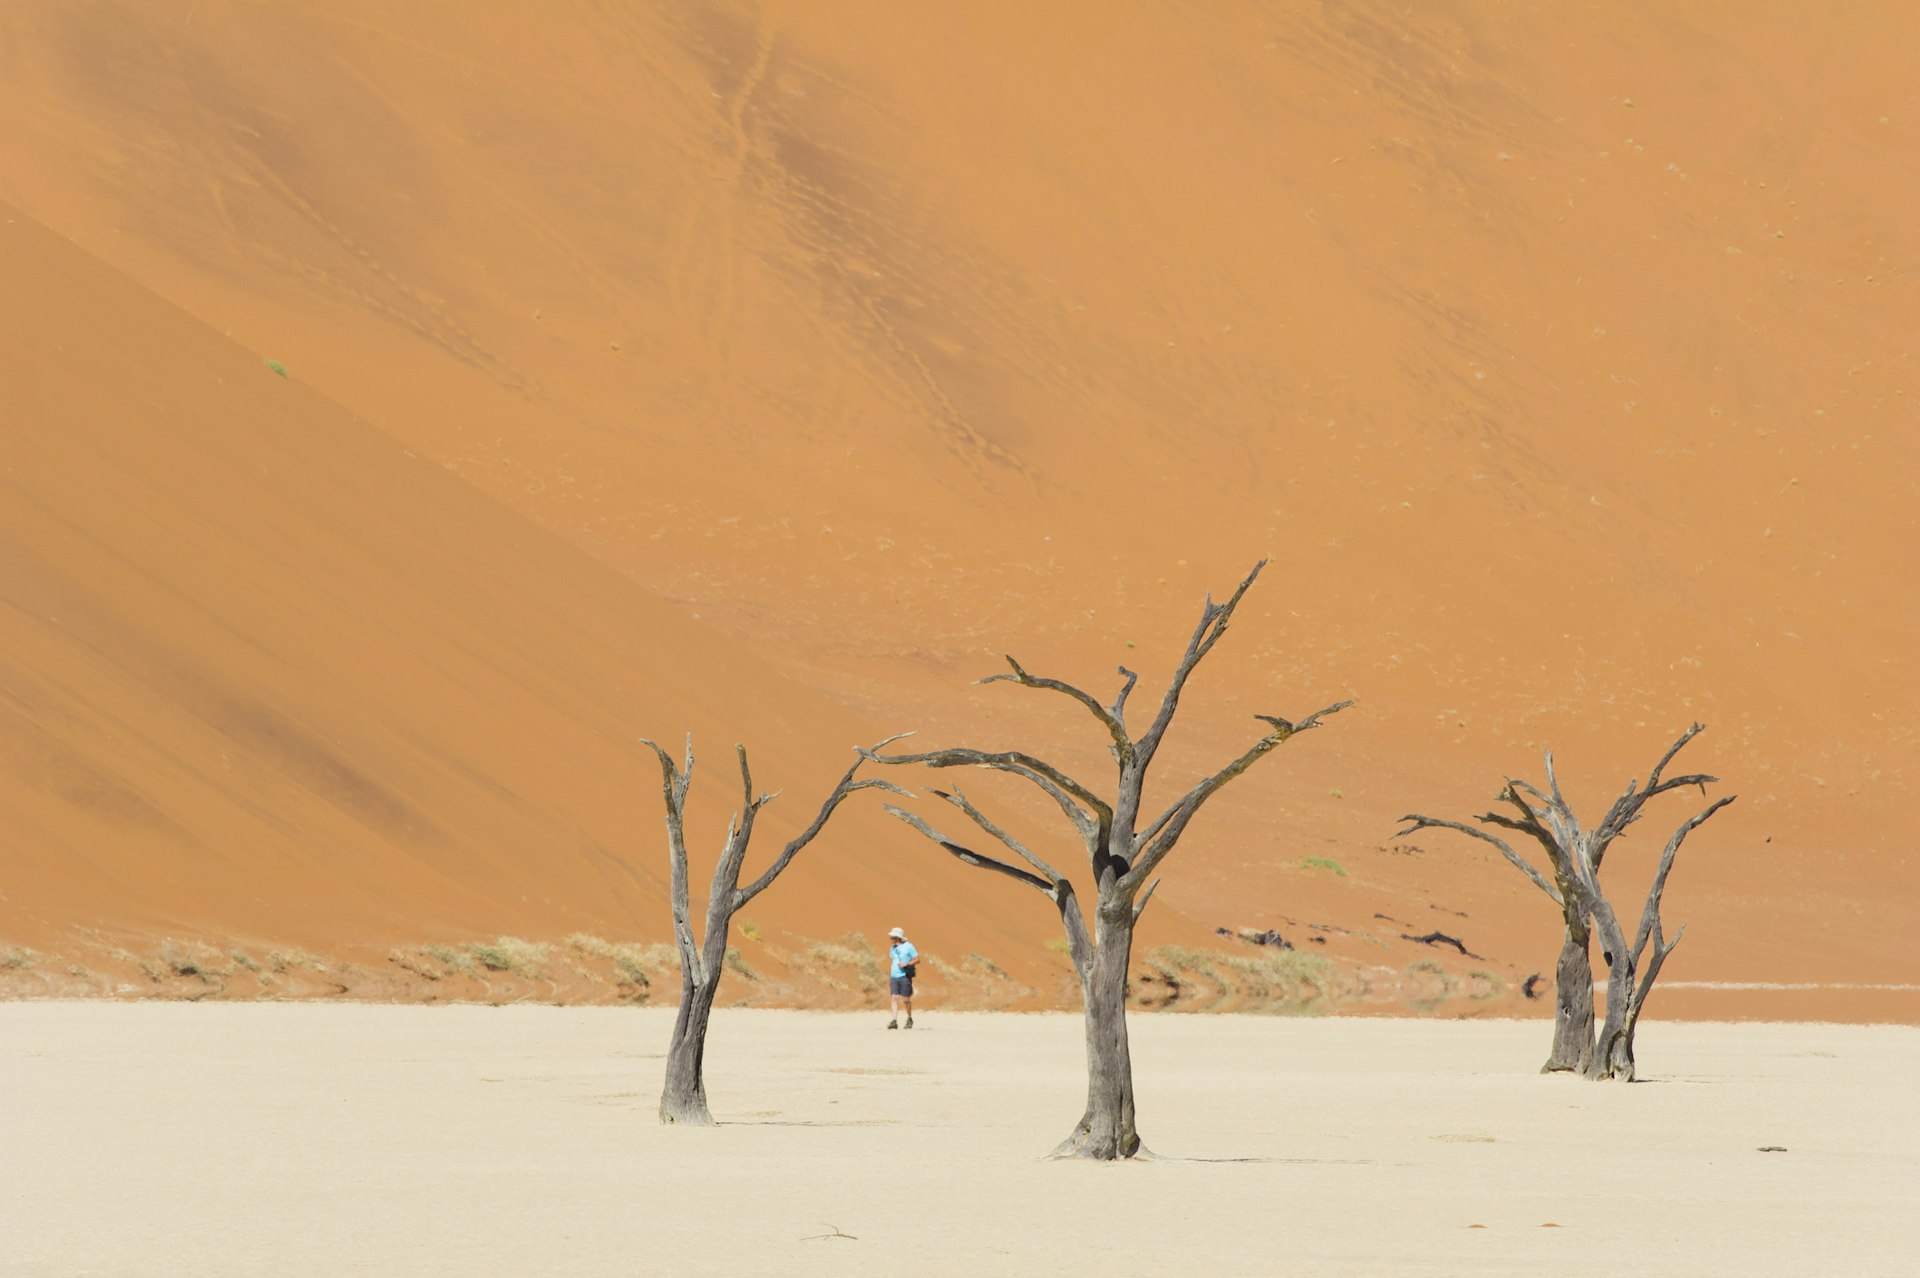 A man walks along the dead acacia trees of the Deadvlei salt pan, with a giant sand dune in the background